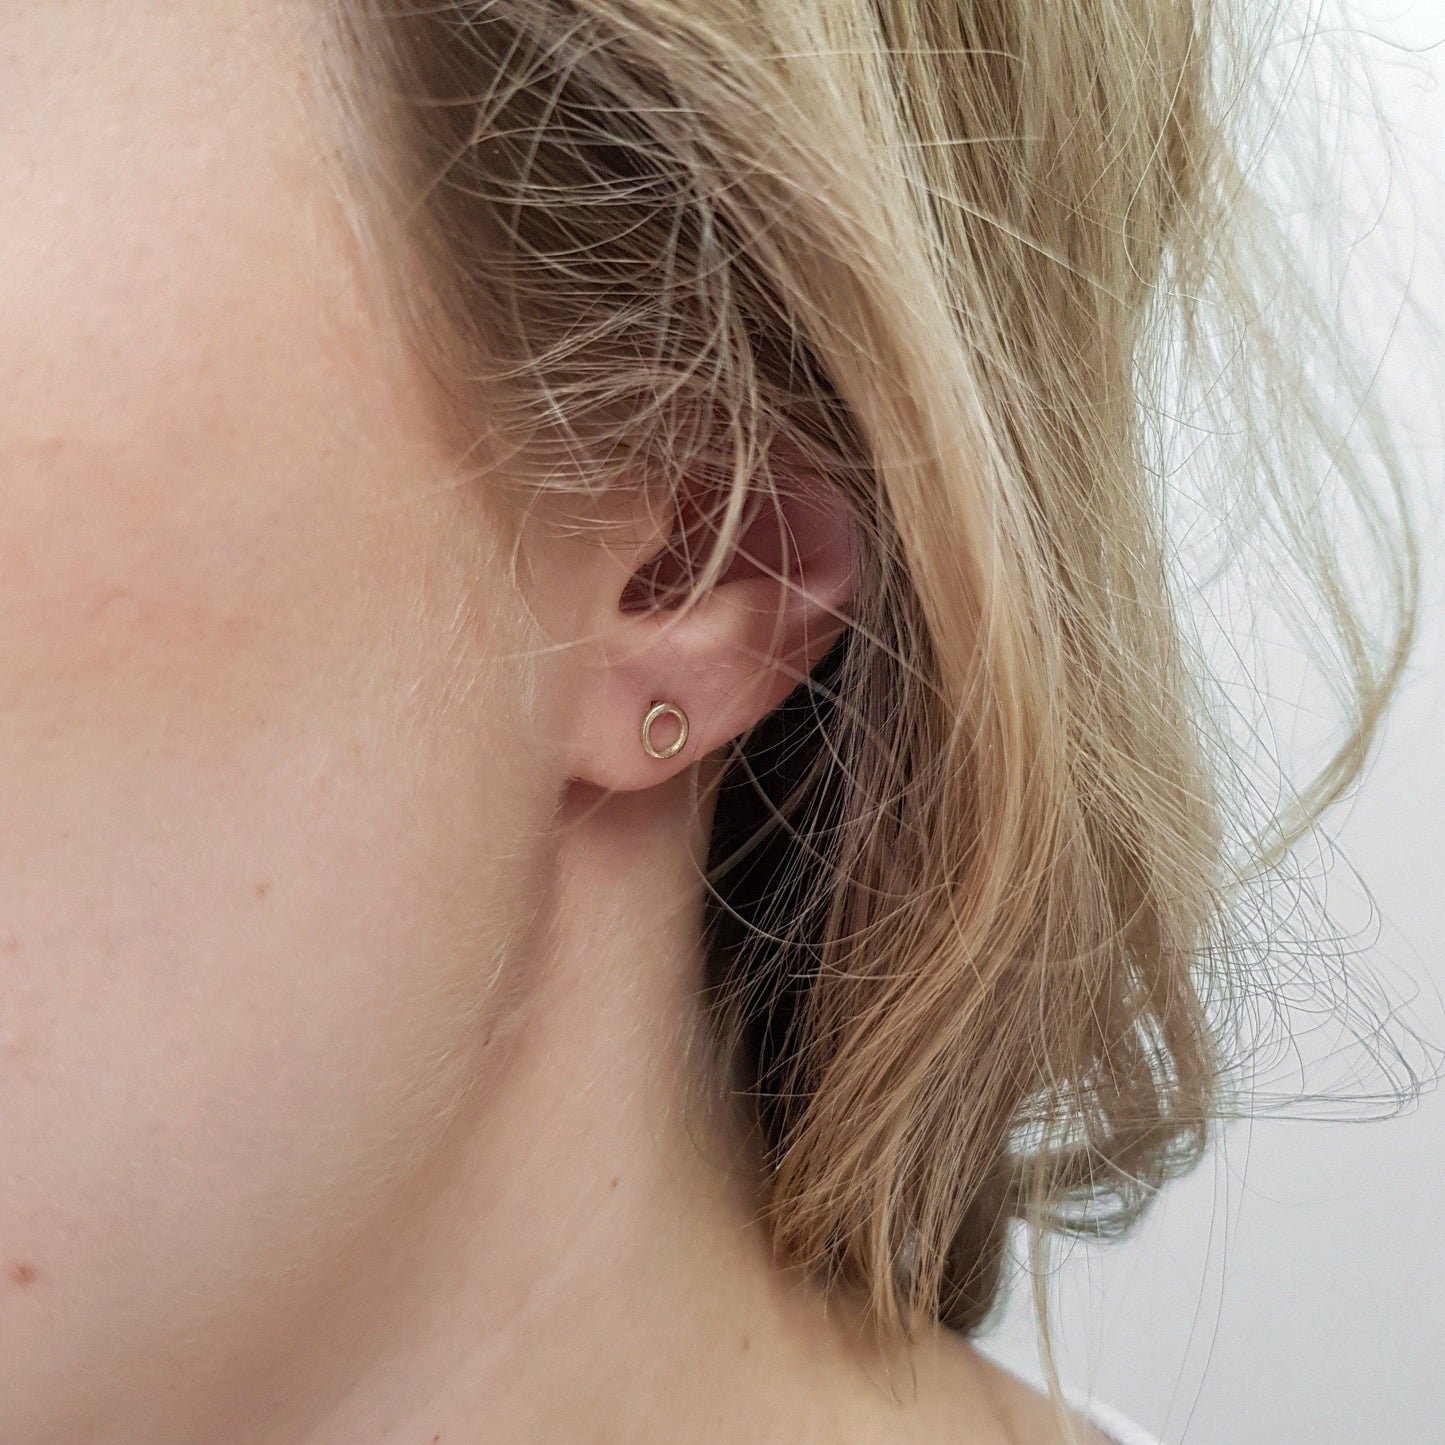 Small Gold Circle Stud Earrings handmade by Anna Calvert Jewellery in the UK